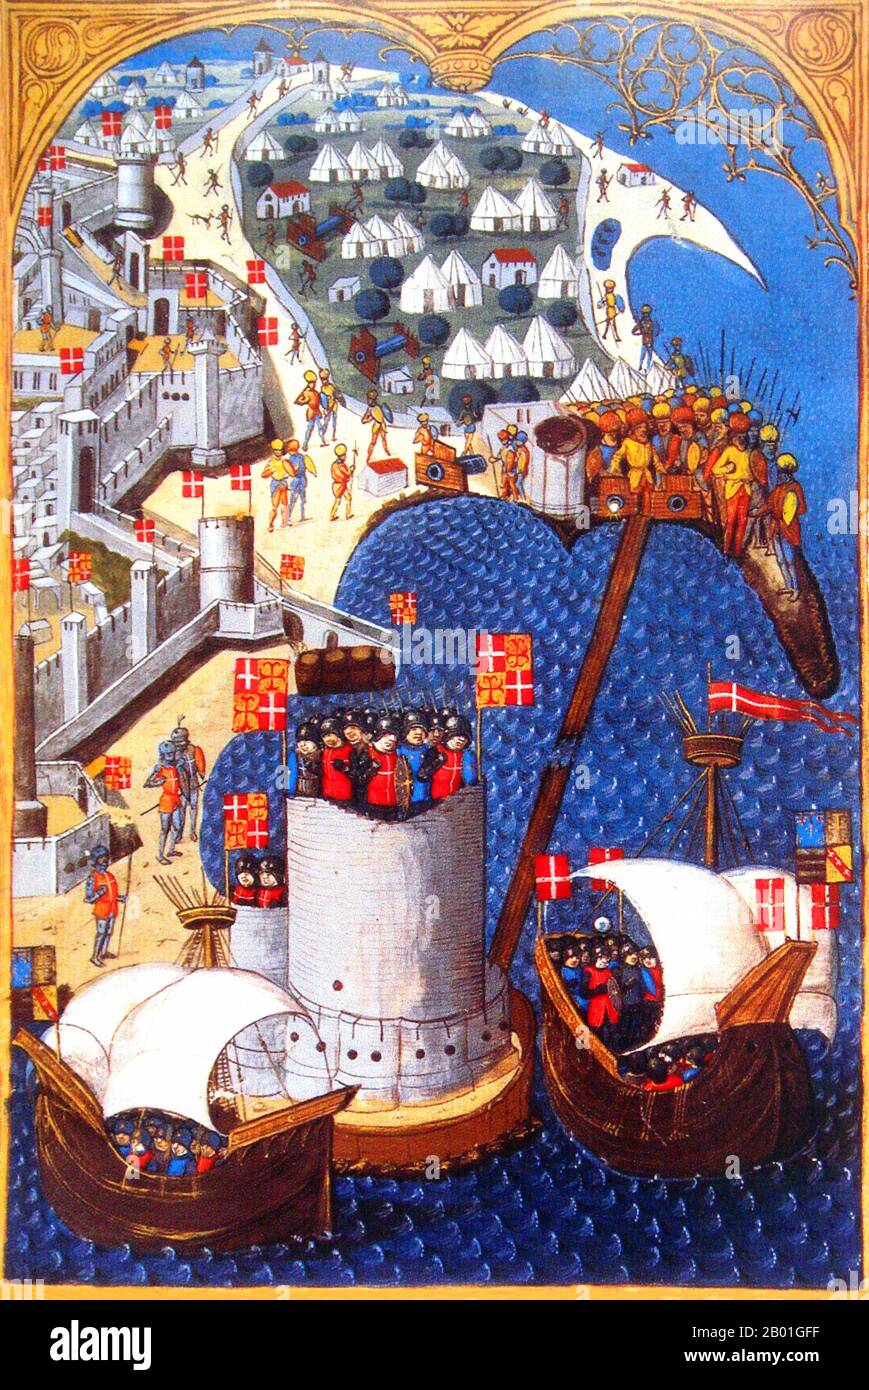 Greece/Venice: The 1480 Siege of Rhodes. Ships of the Hospitallers in the forefront, and Turkish camp in the background (Ottoman-Venetian Wars). Illumination by Master of the Cardinal de Bourbon (fl. 1470-1500), c. 1483.  On 23 May 1480 an Ottoman fleet of 160 ships appeared before Rhodes, at the gulf of Trianda, along with an army of 70,000 men under the command of Gedik Ahmed Pasha or Mesih Pasha. The Knights Hospitaller garrison was led by Grand Master Pierre d'Aubusson. The Knights were reinforced from France by 500 knights and 2,000 soldiers under d'Aubusson's brother Antoine. Stock Photo